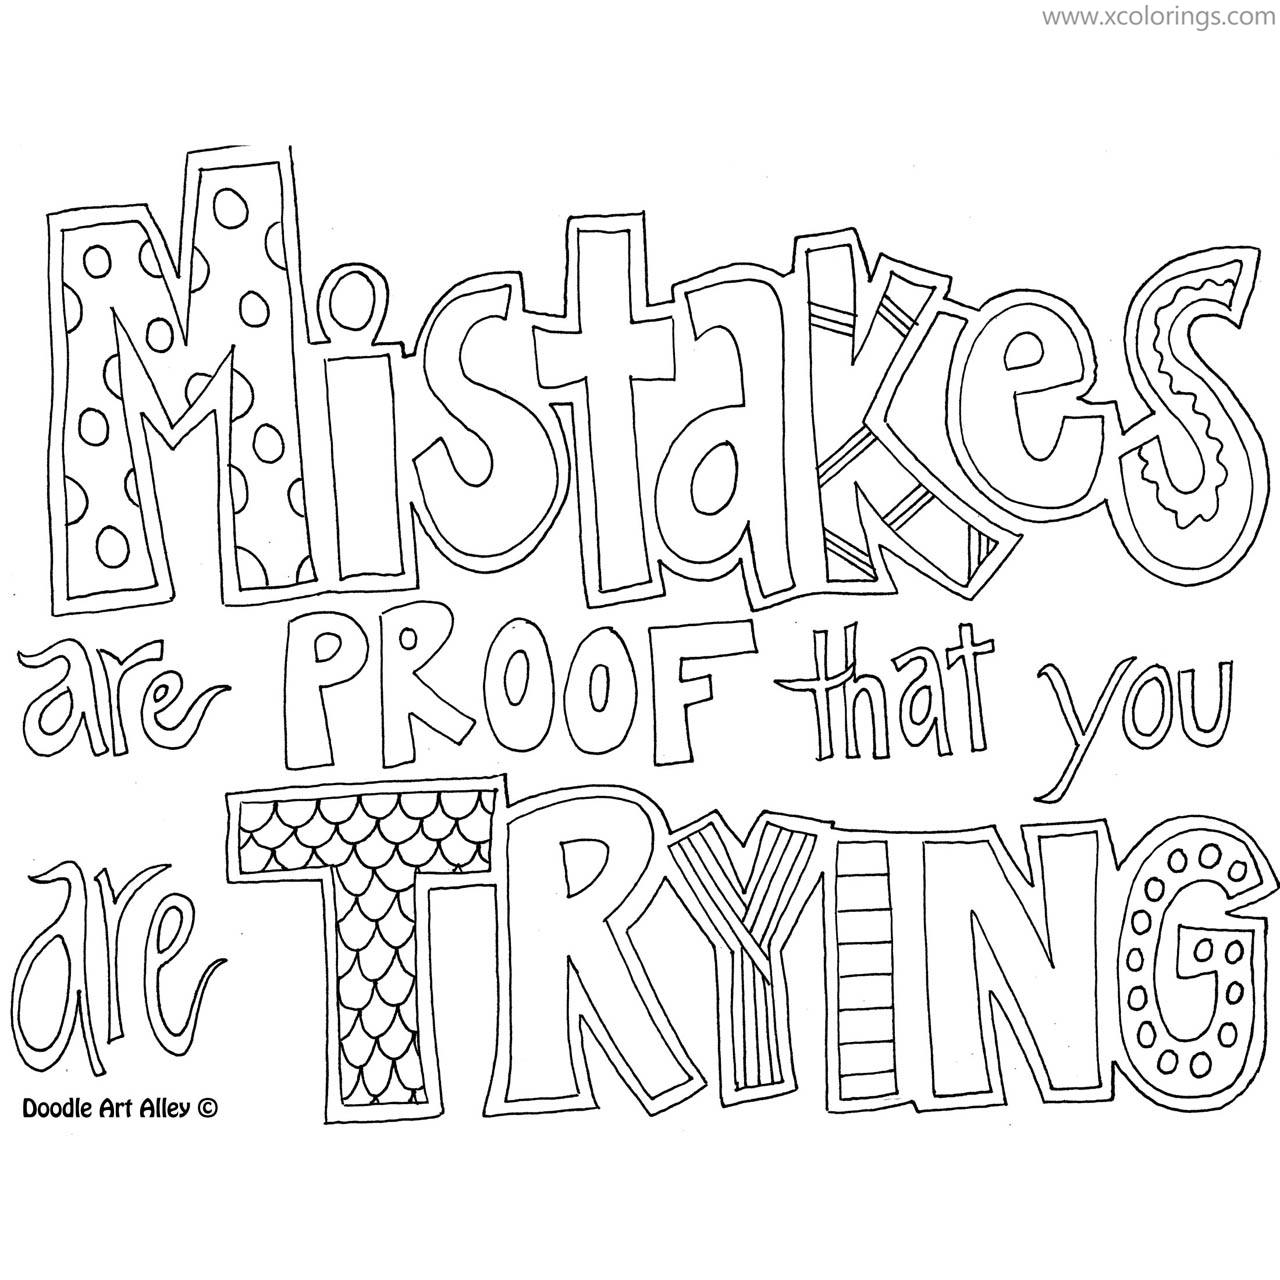 Free Dr Seuss Quotes Coloring Pages Mistakes Are Proof That You Are Trying printable